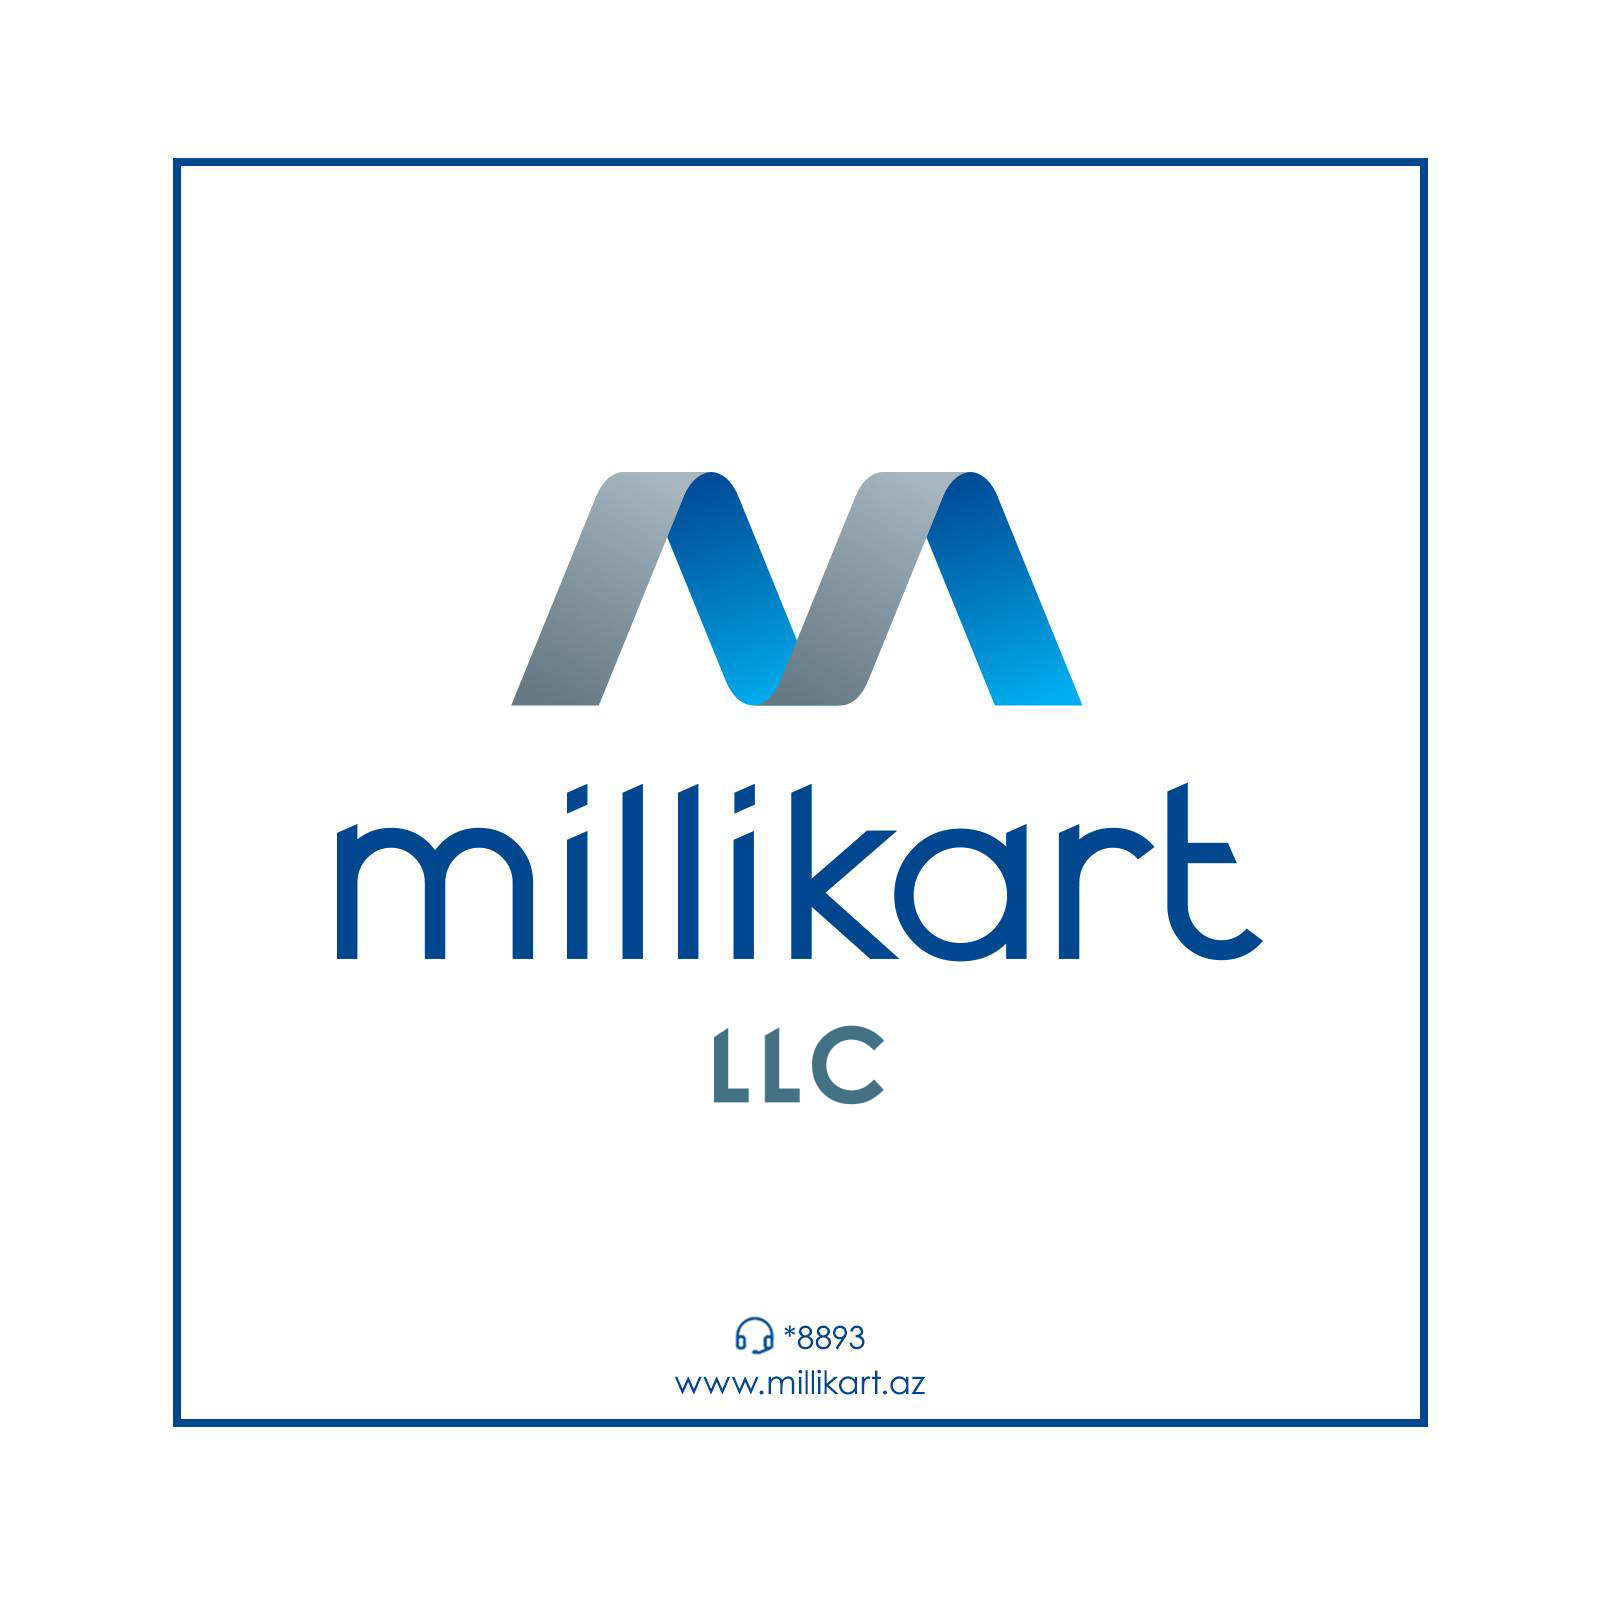 NEXT MEETING OF GENERAL ASSEMBLY OF PARTICIPANTS (FOUNDERS) OF “MILLIKART” LLC WAS HELD